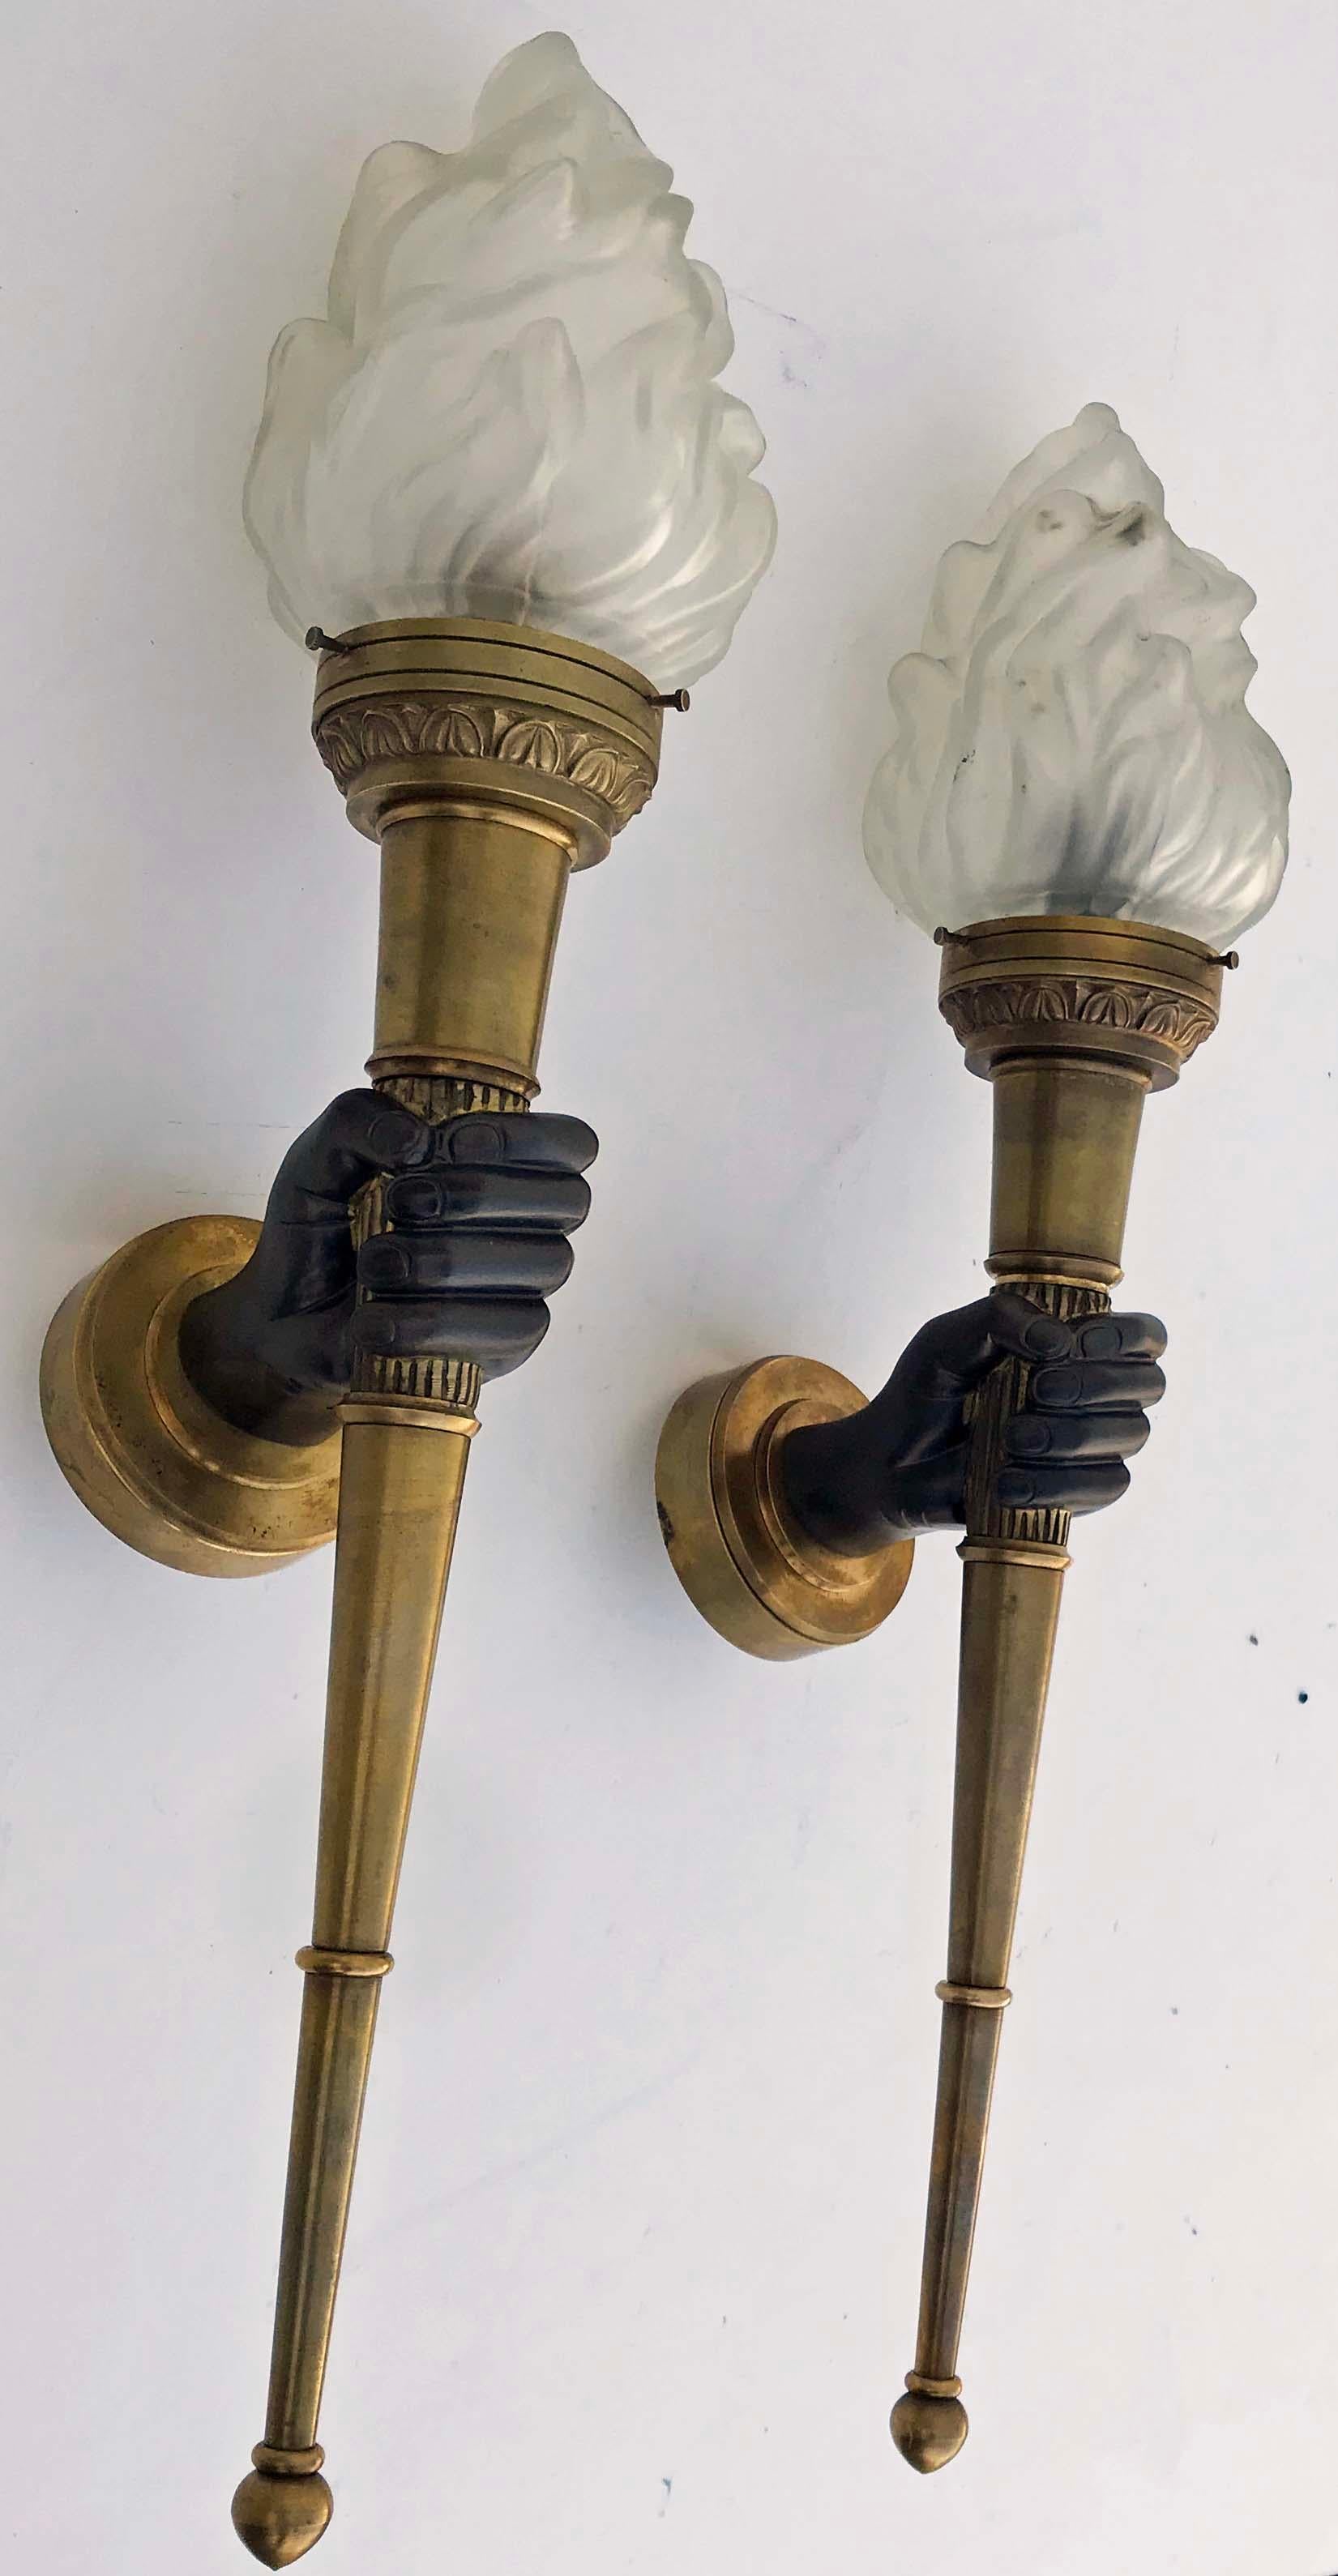 Superb pair of signed Atelier Petitot sconces, from an Avignon chateau.
High quality bronze 
Priced by pair.
US rewired and in working condition
Measures: Back plate: 3.5